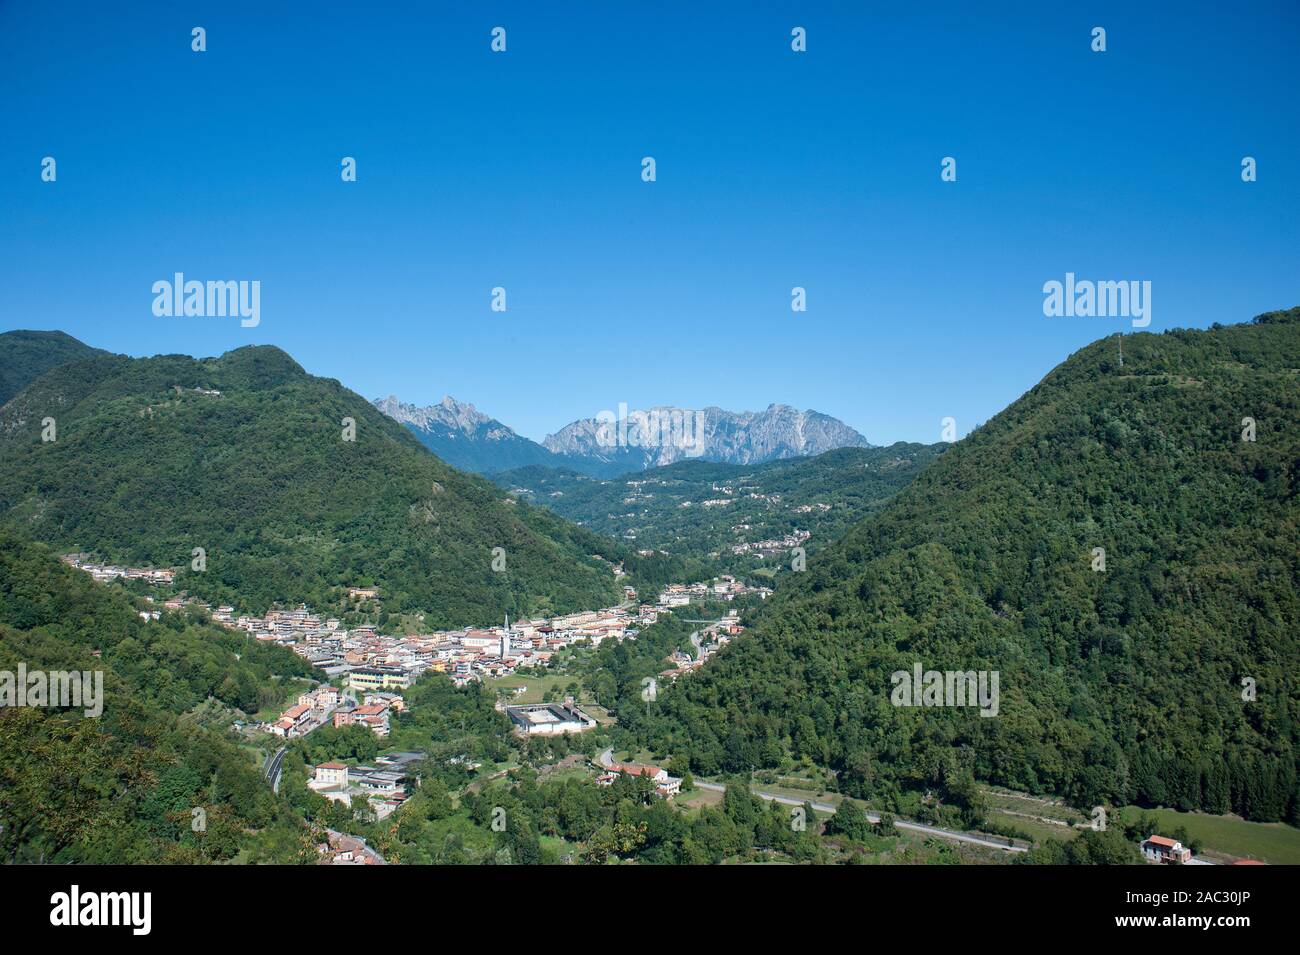 view of  little town of San Quirico at the foot of mountain range: Piccole Dolomiti - Valdagno, Italy Stock Photo